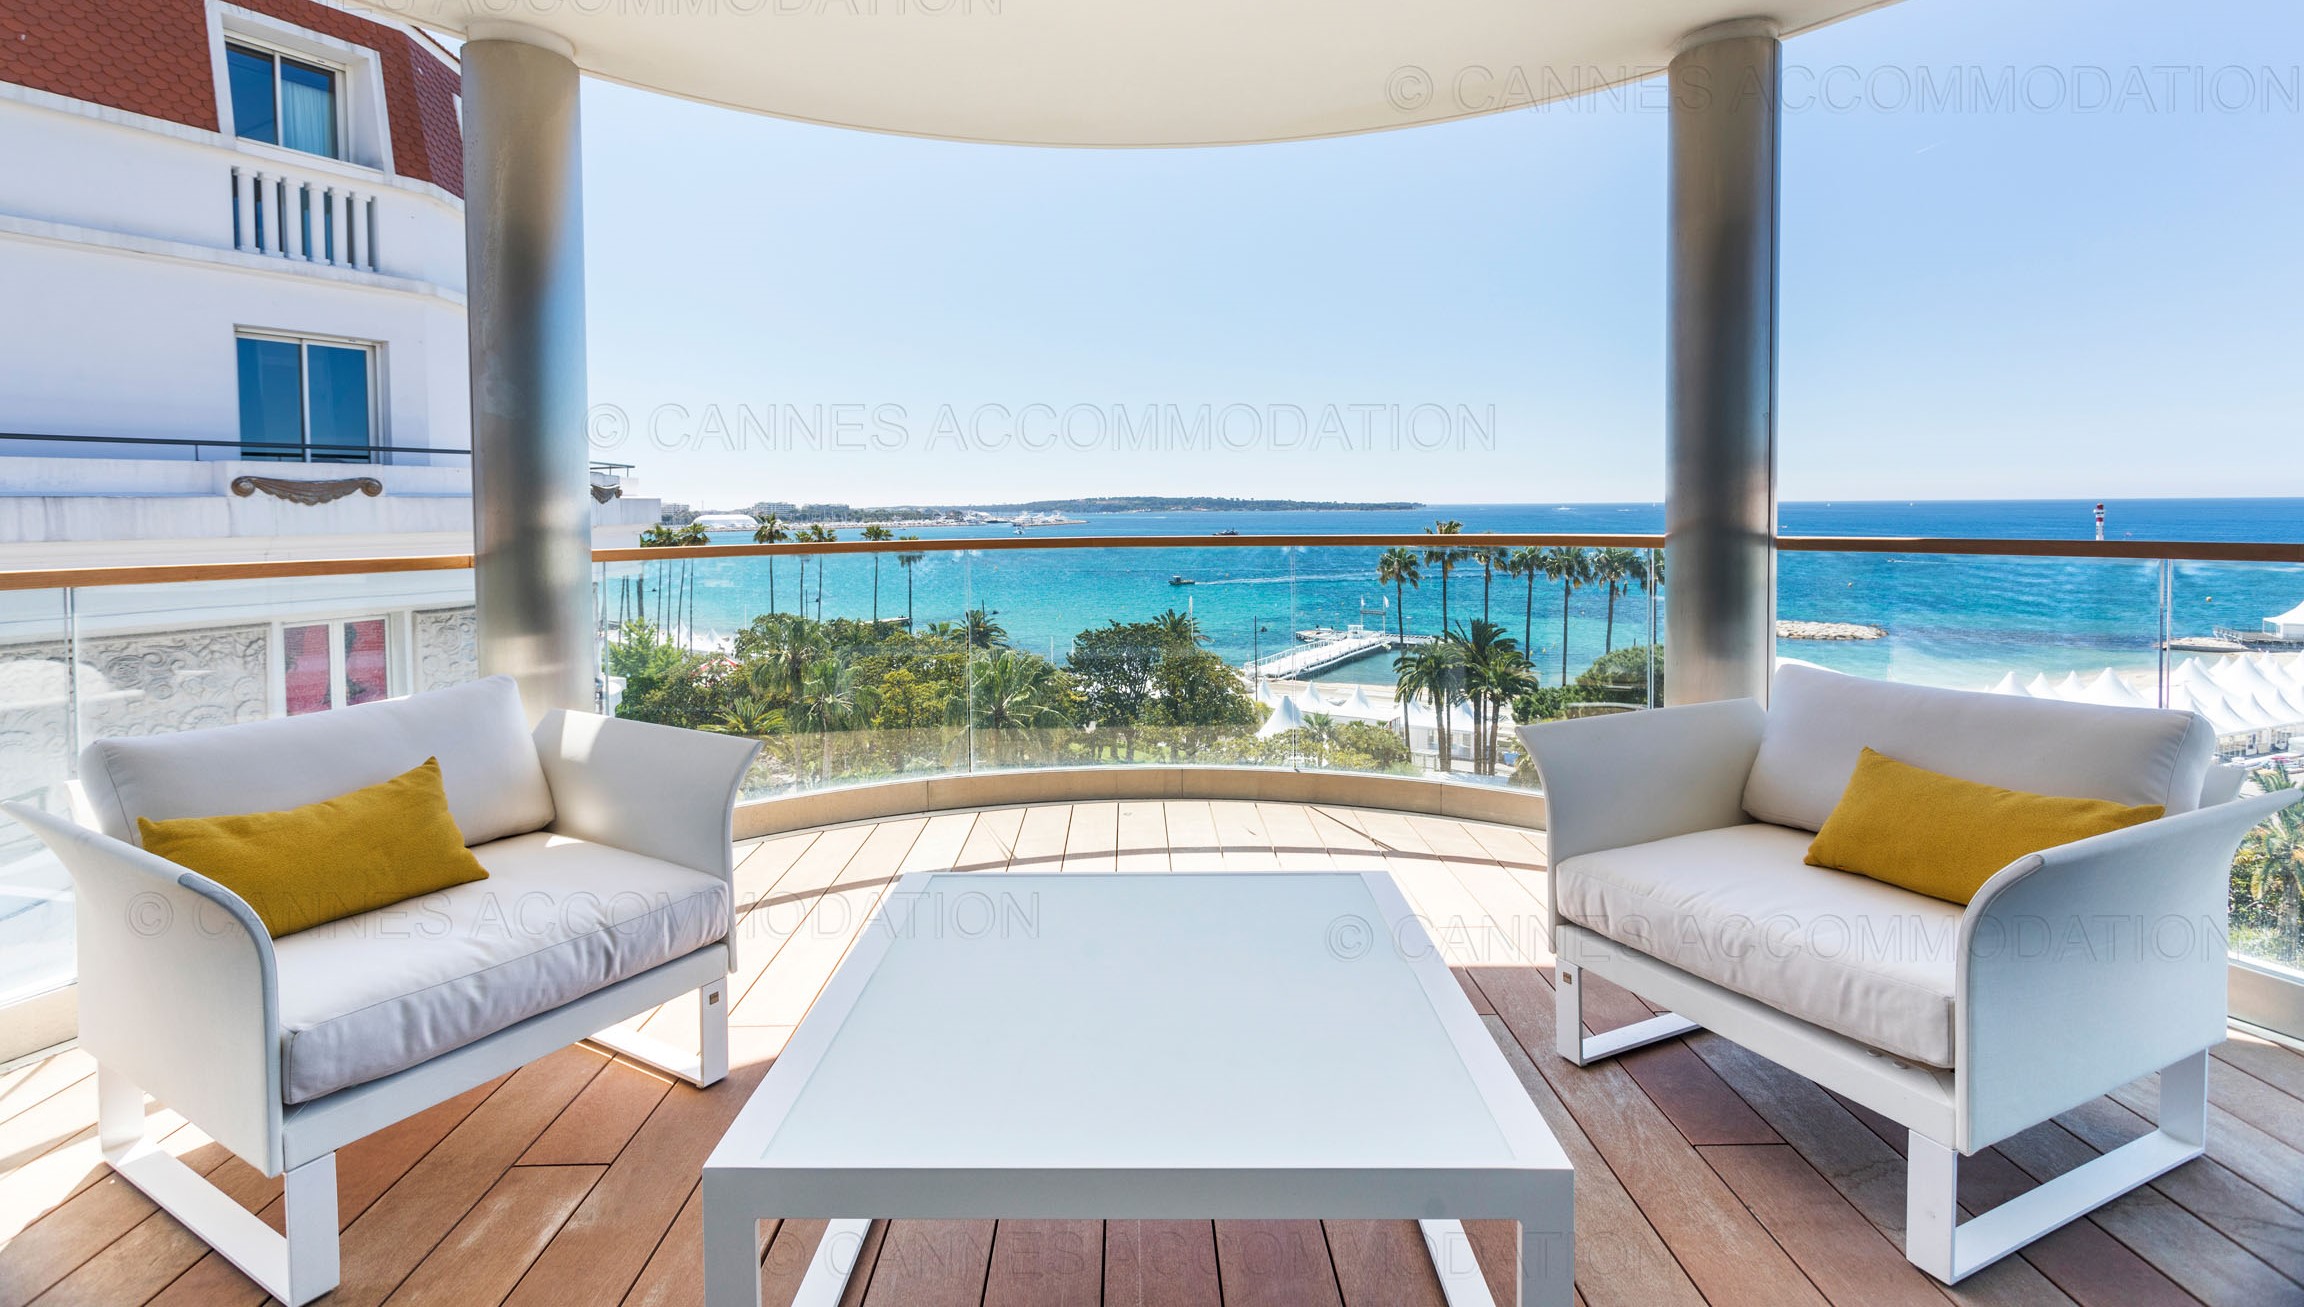 Cannes Accommodations COVID19 - WHAT YOU NEED TO KNOW